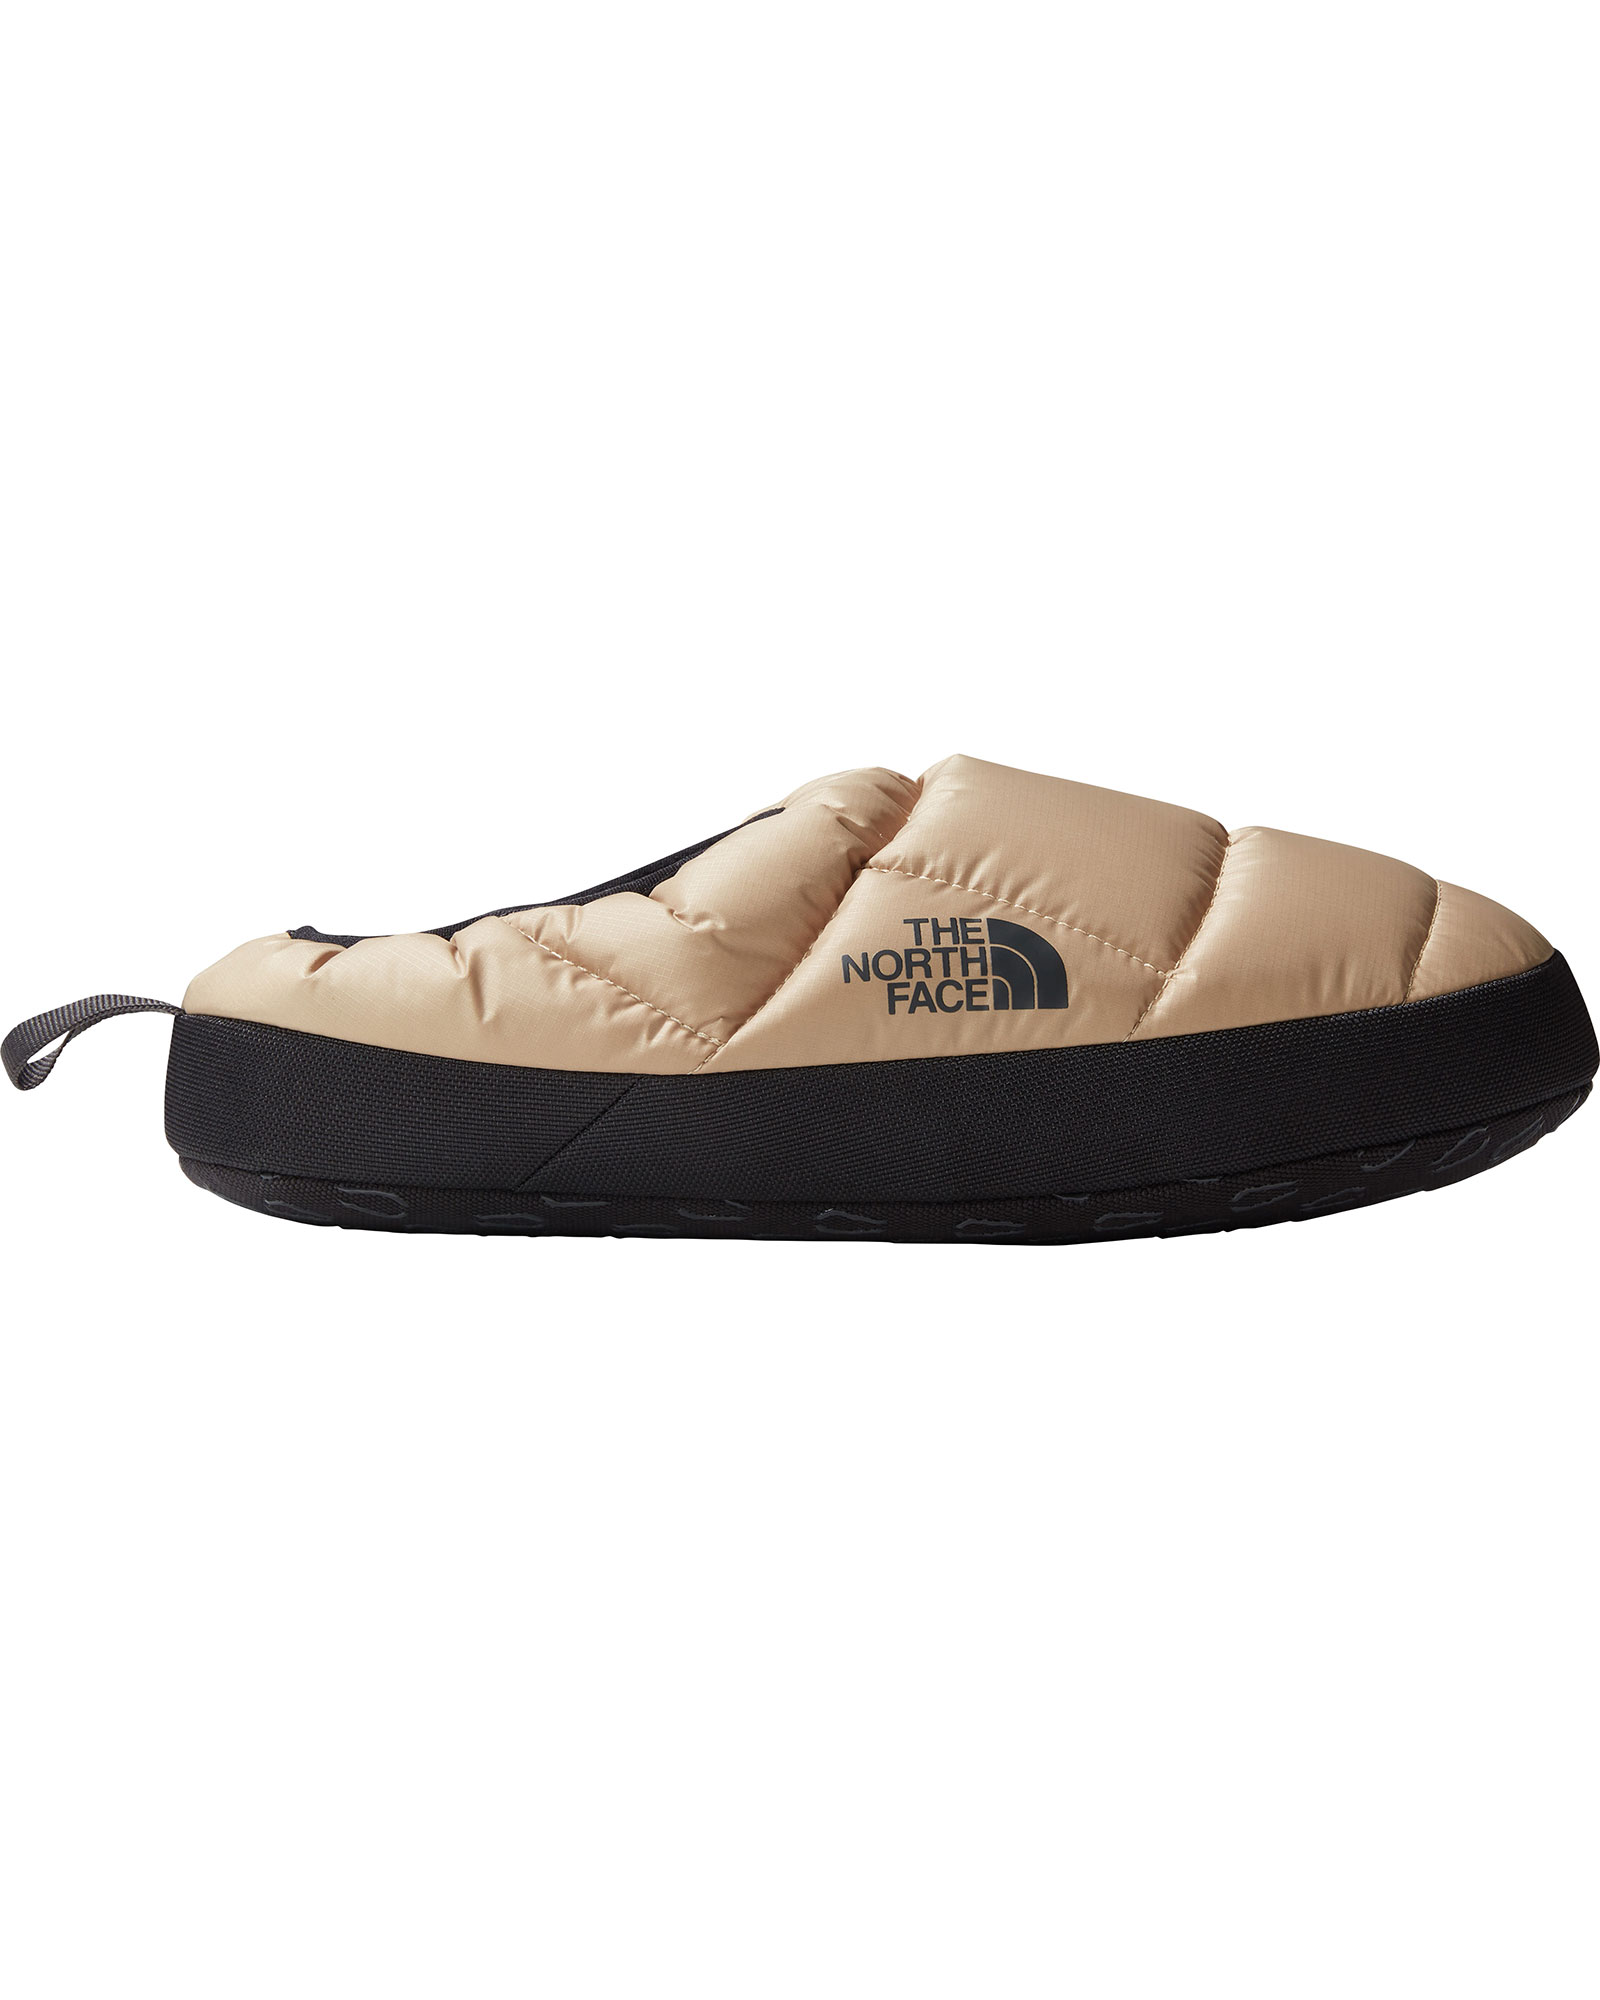 The North Face Men’s ThermoBall NSE Mules III - Khaki Stone/TNF Black M